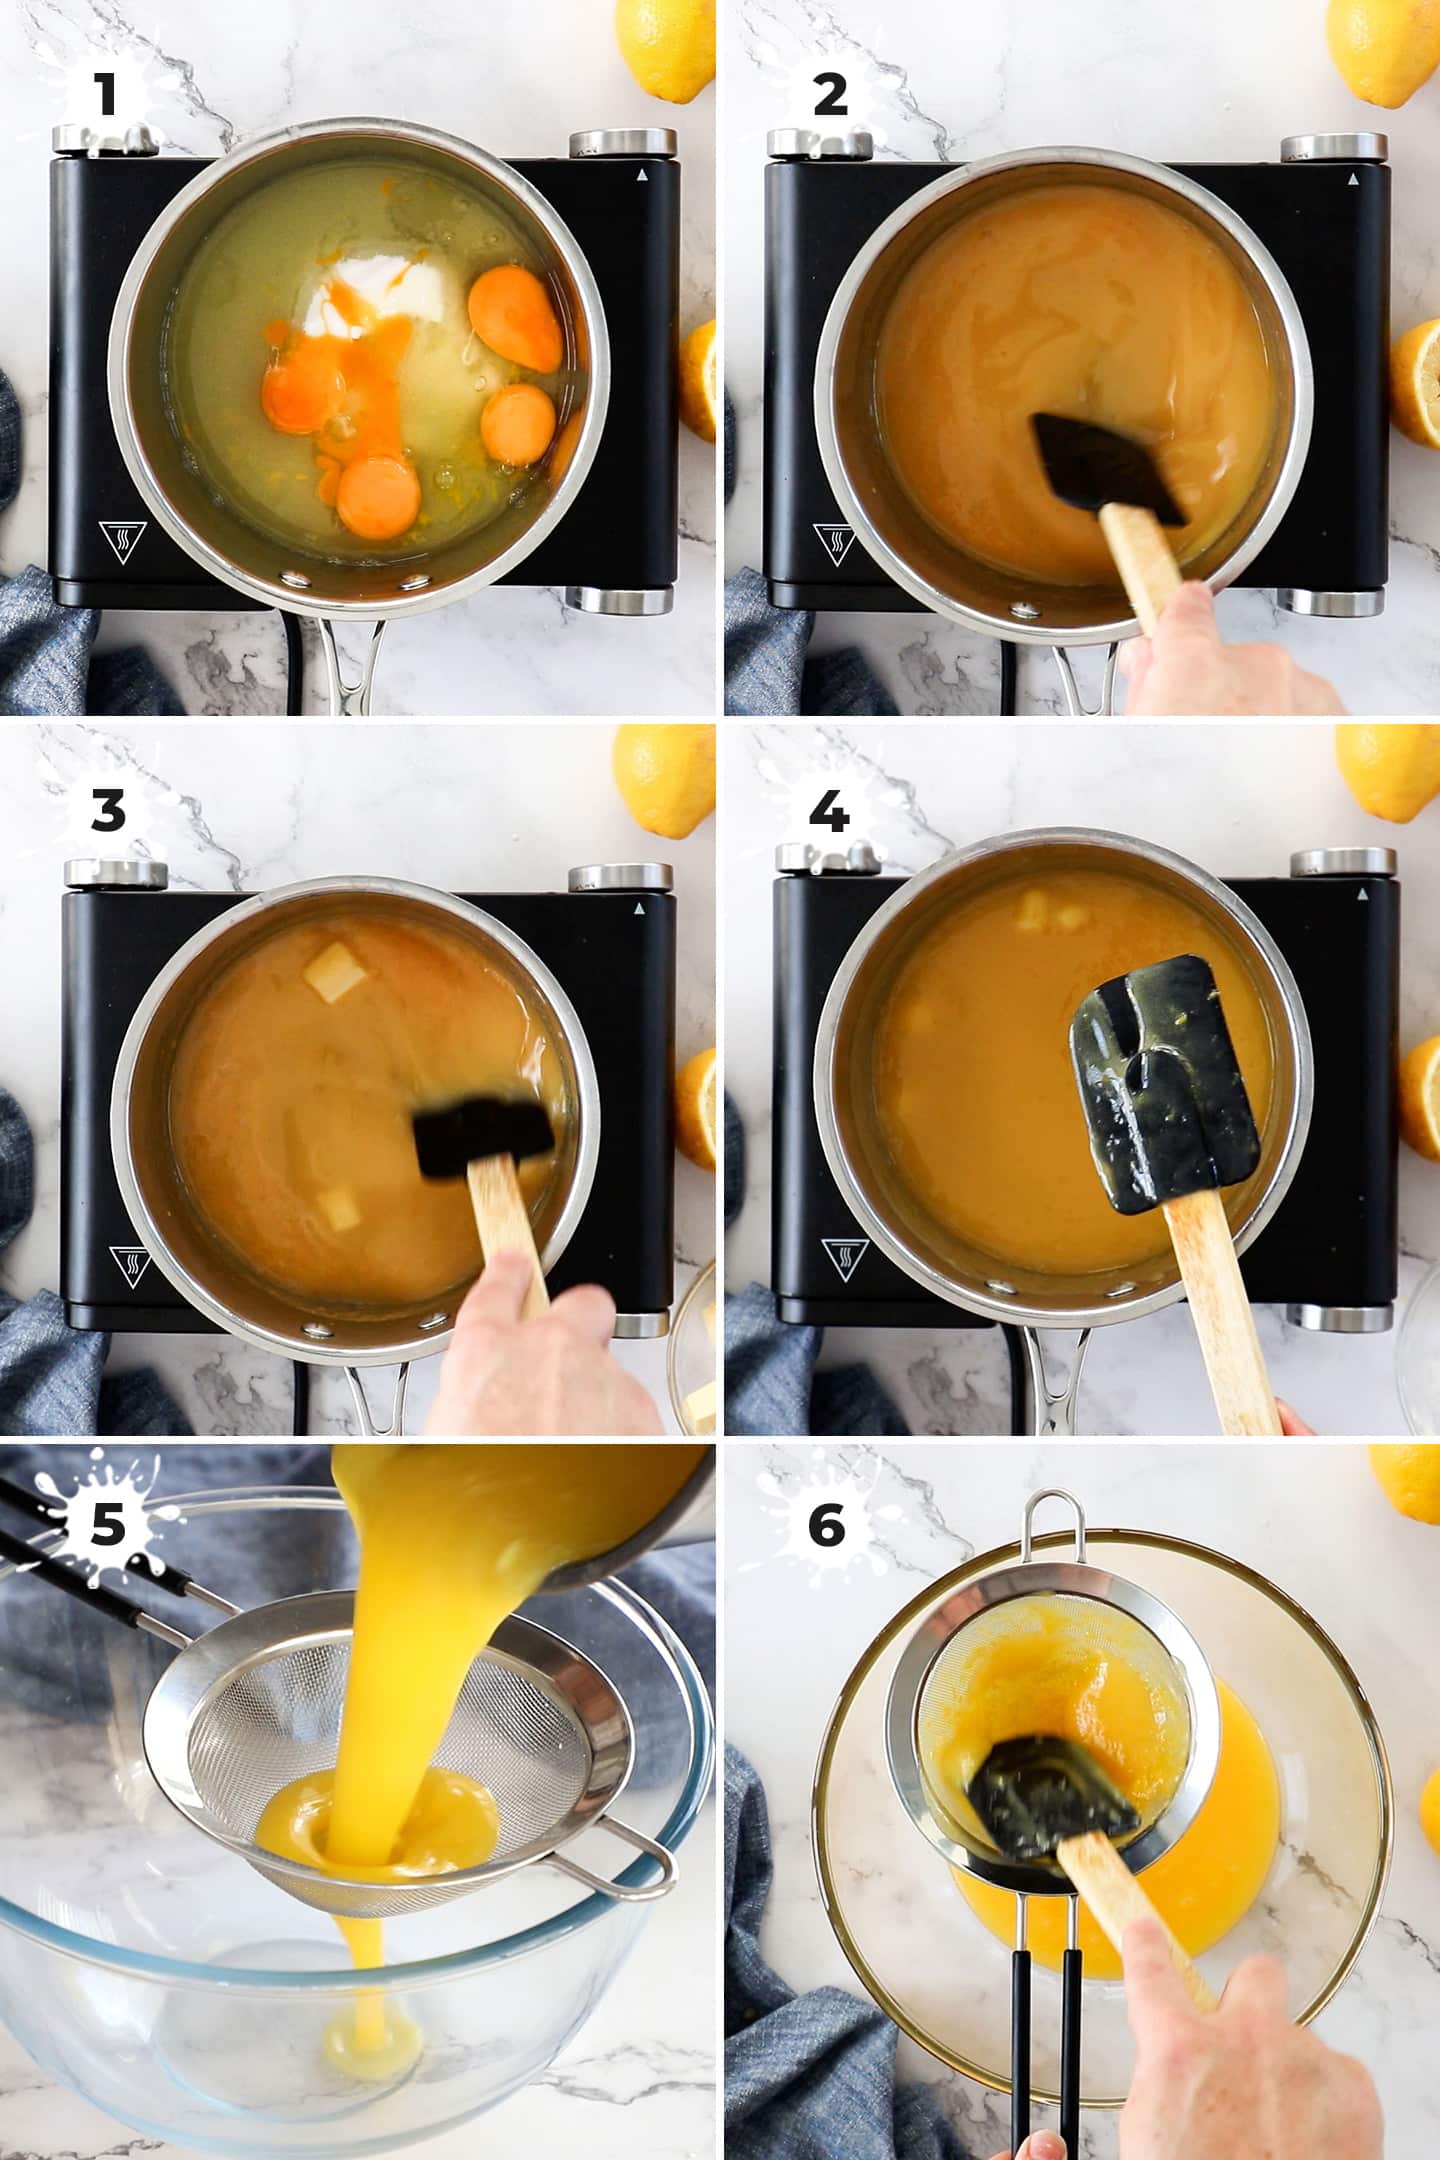 6 images showing the steps to making lemon curd.